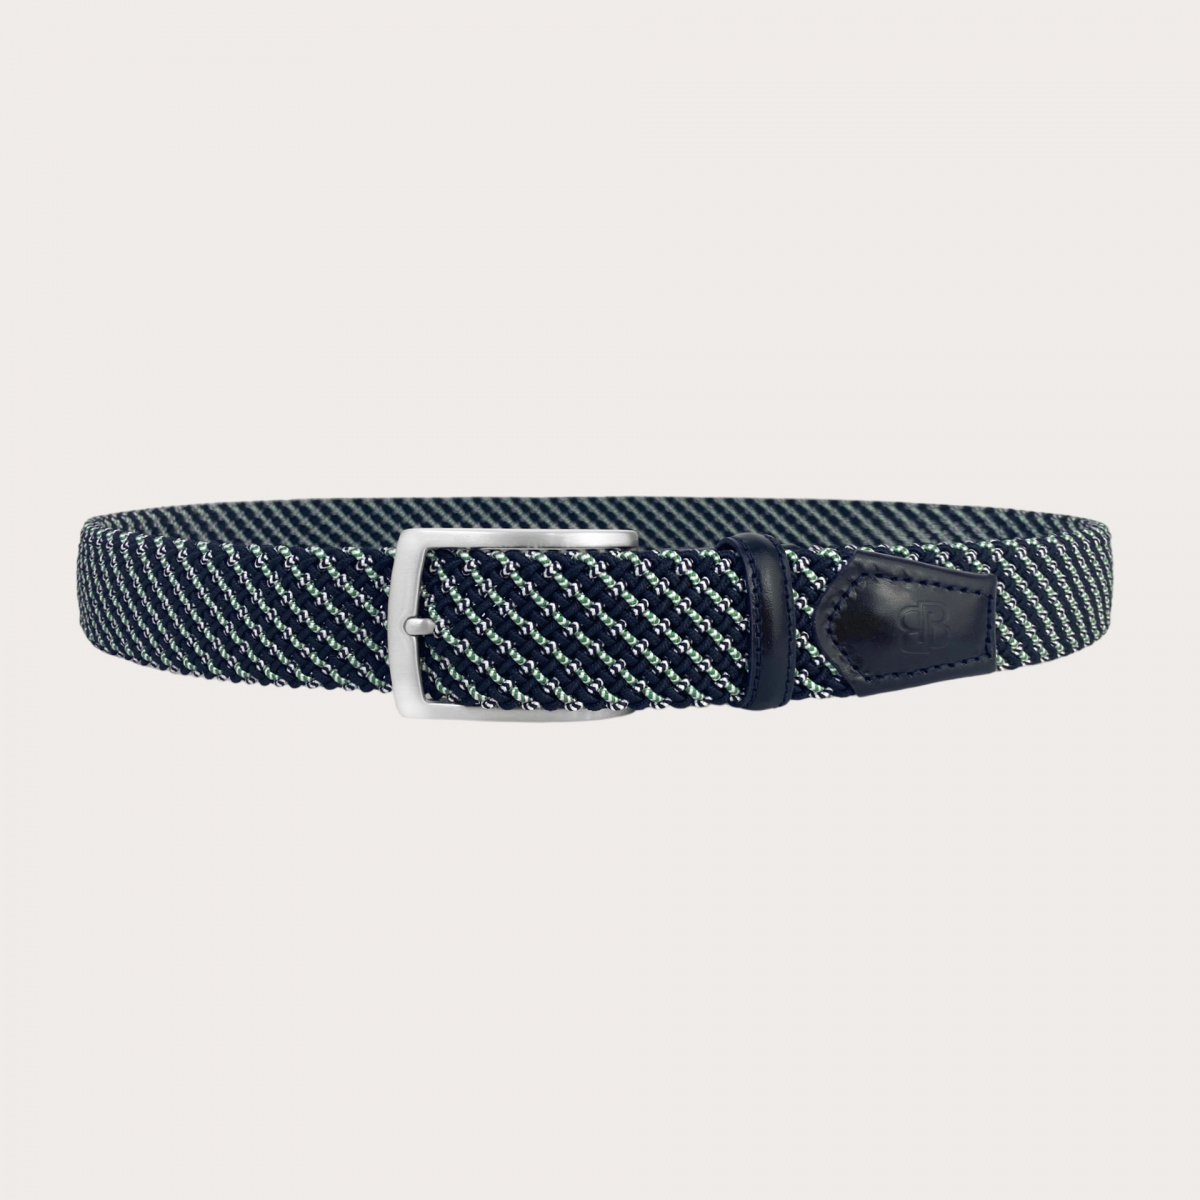 BRUCLE Braided elastic belt in blue with white and green oblique micro stripes